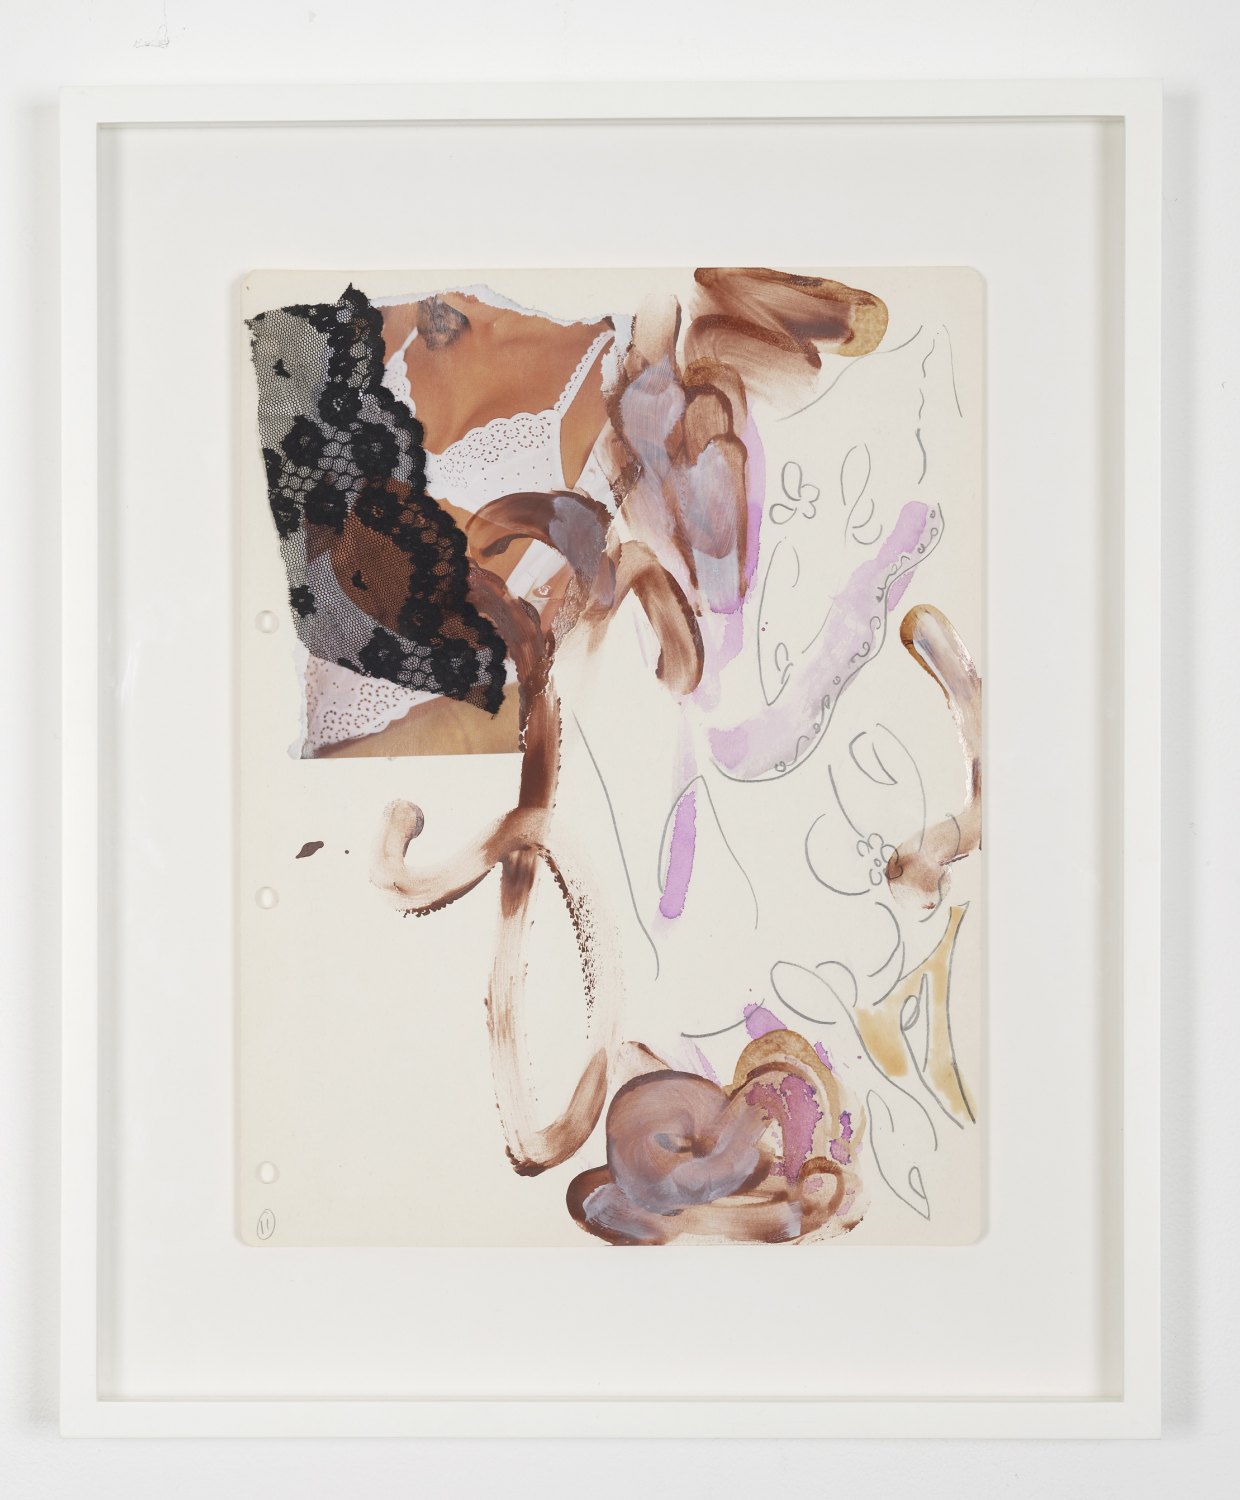 Marc Camille Chaimowicz From Suite One..., 1995 Pencil, ink, and gouache on paper, 60 × 47 cm